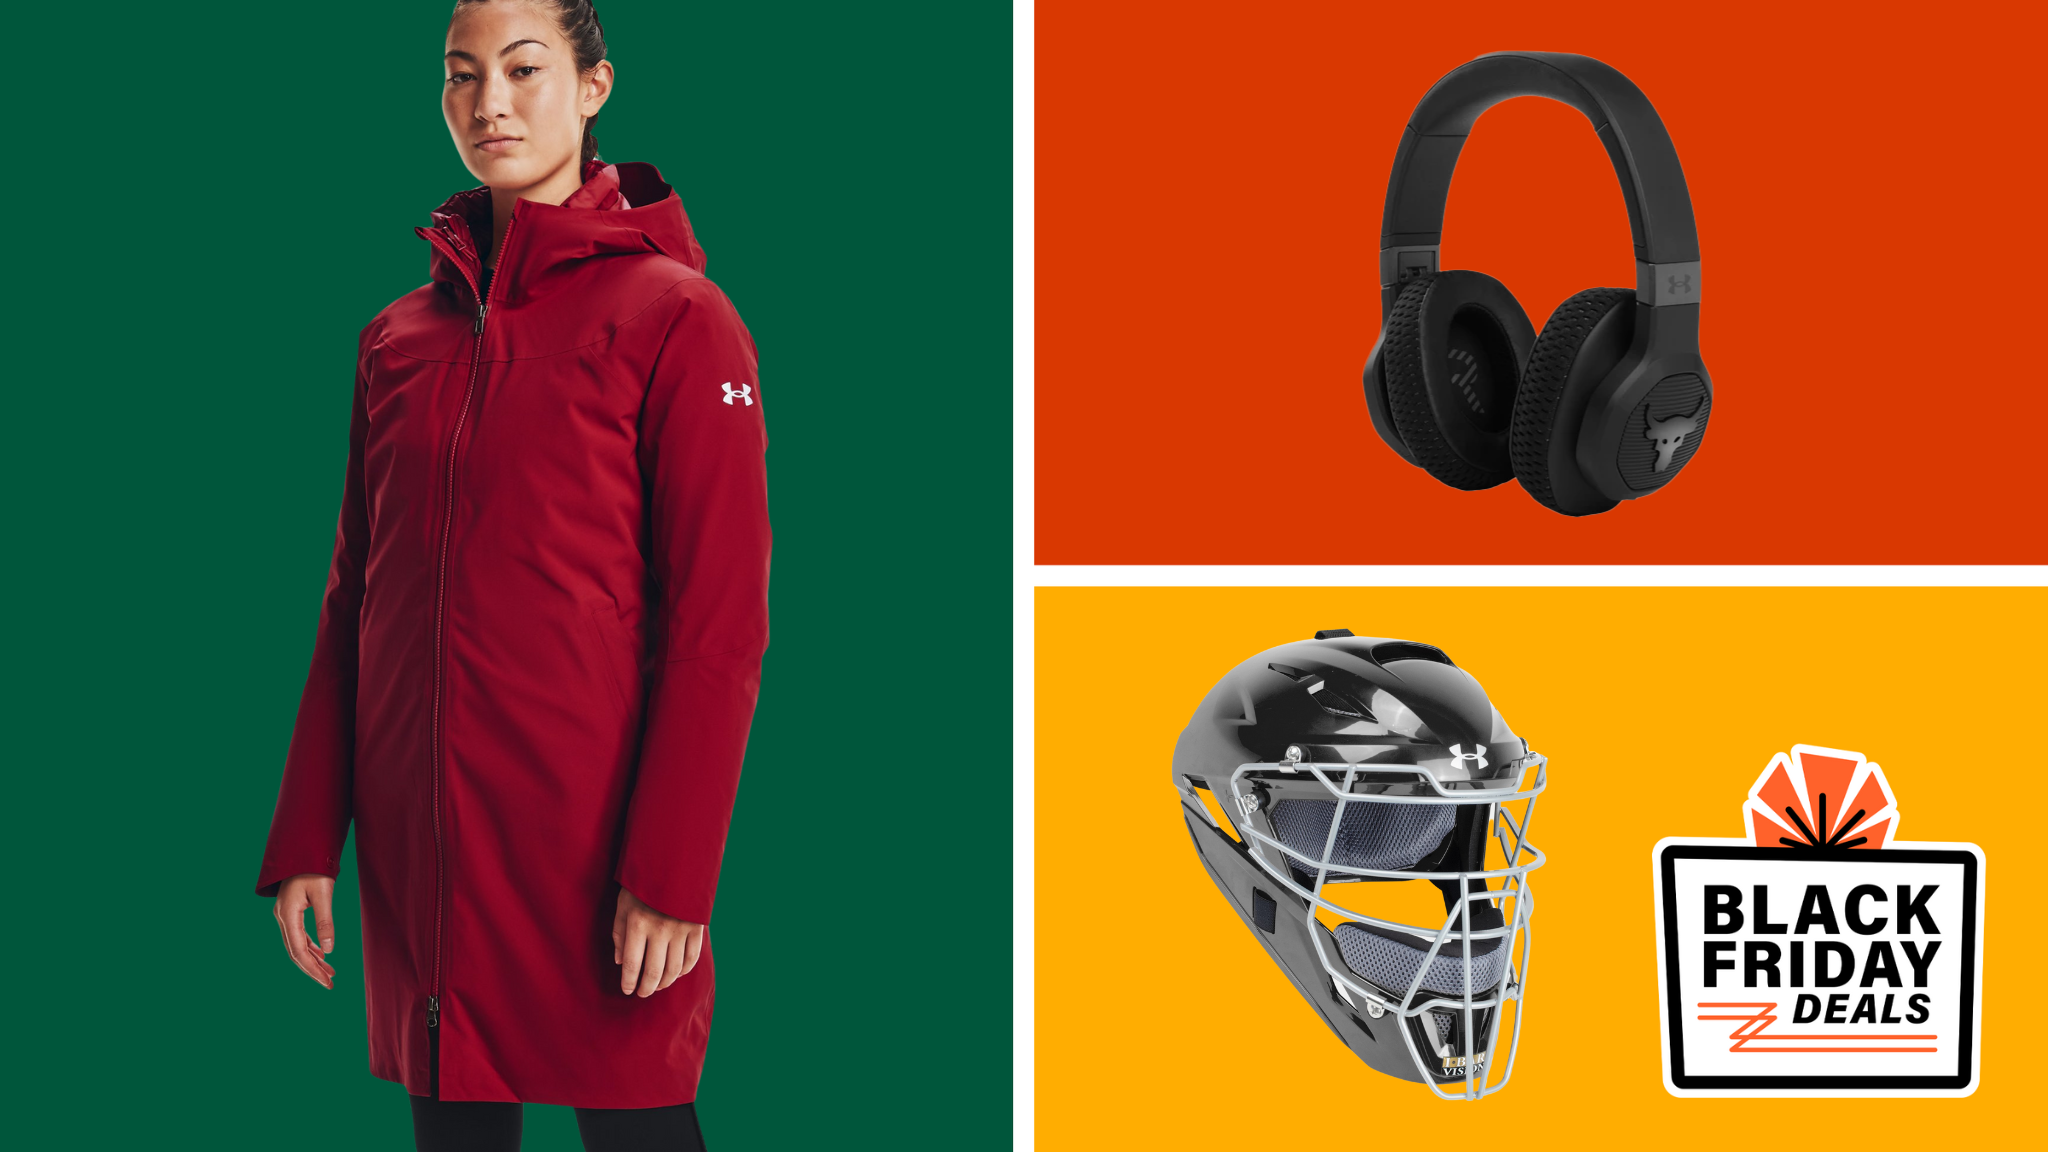 Save up to 50% off Under Armour during the early Black Friday sale.